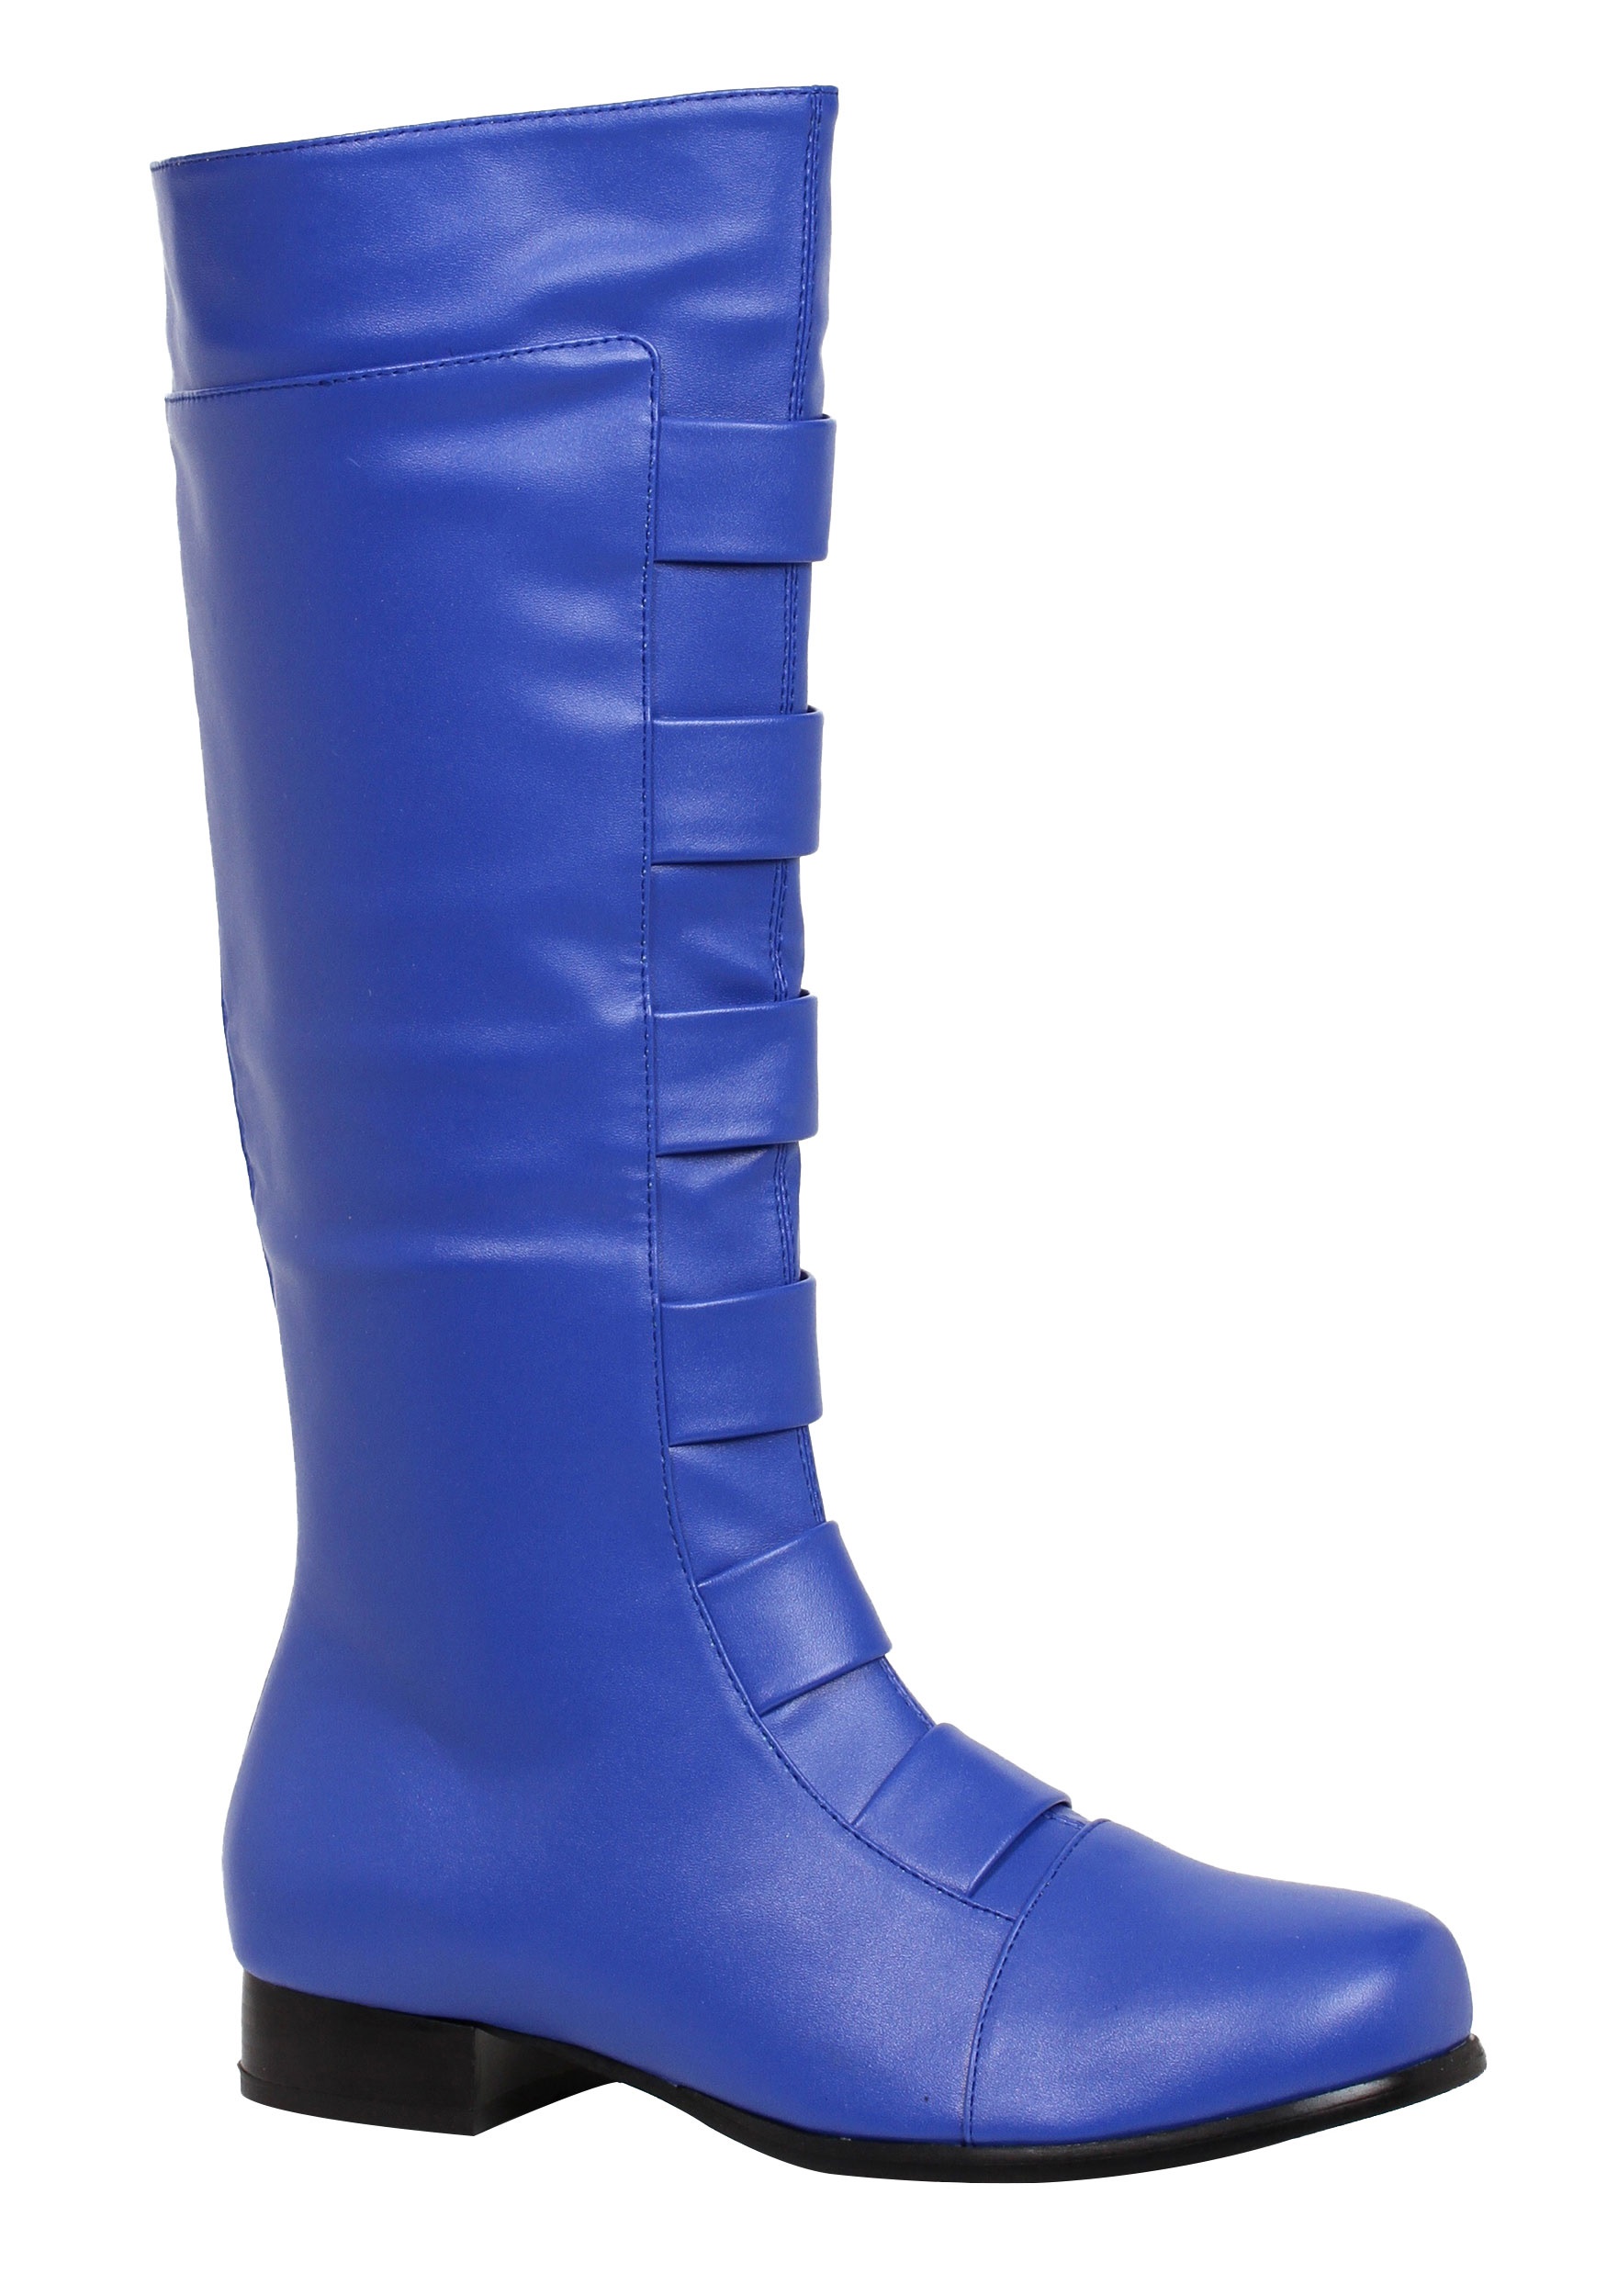 Blue Superhero Boot for Adults